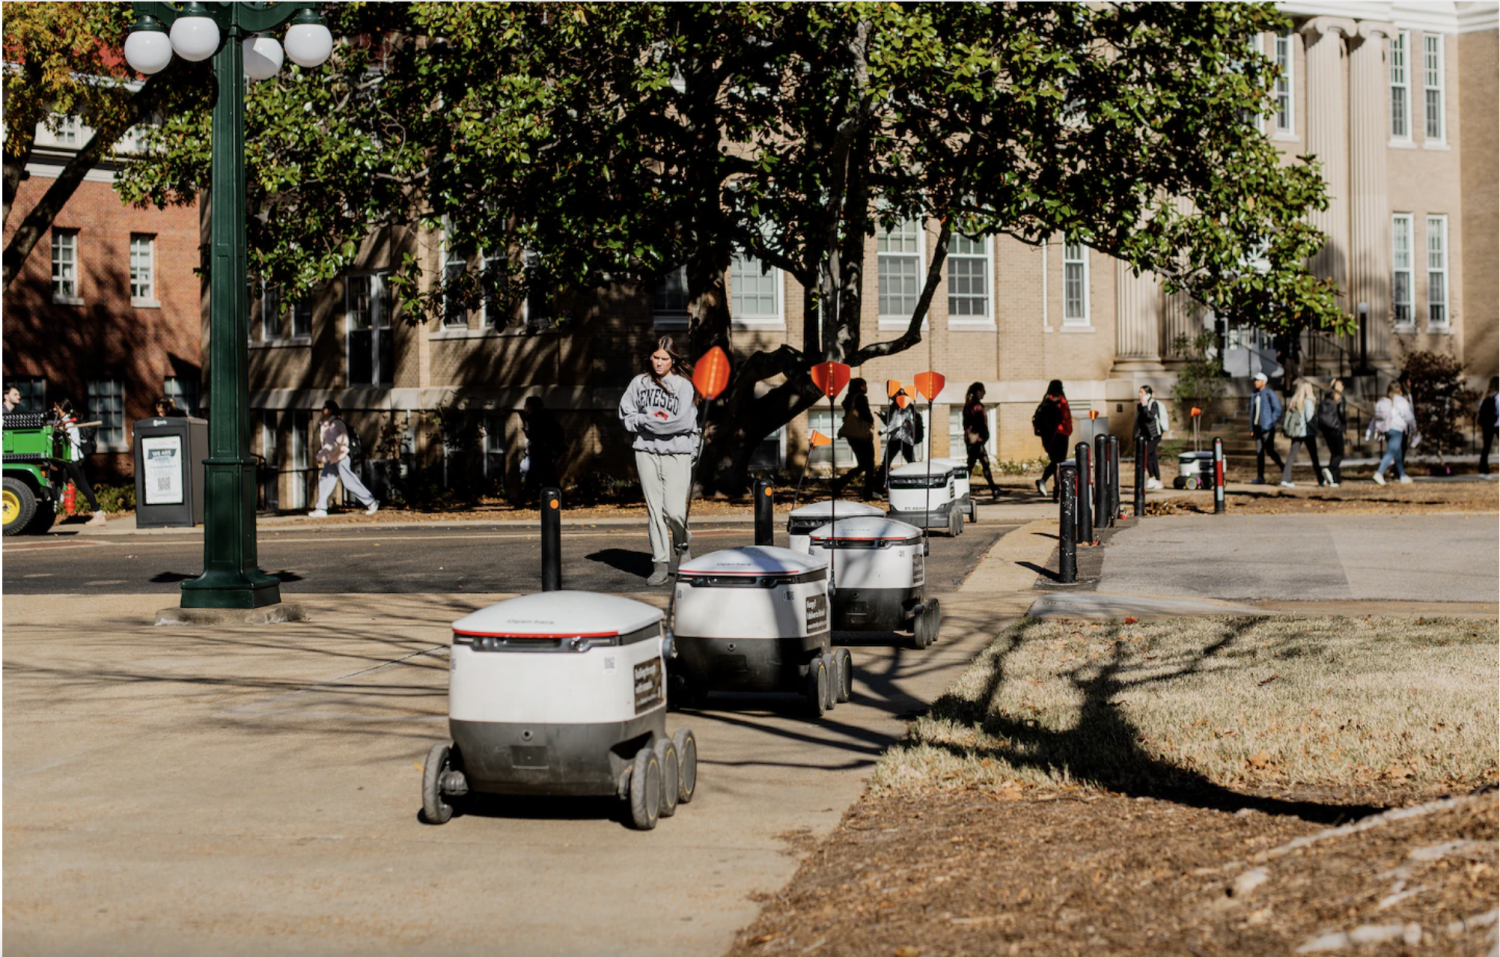 The University of Mississippi is dotted with small motorized robots called 'Starships' that deliver food and other conveniences across the university's campus. (Houston Cofield for The Washington Post)